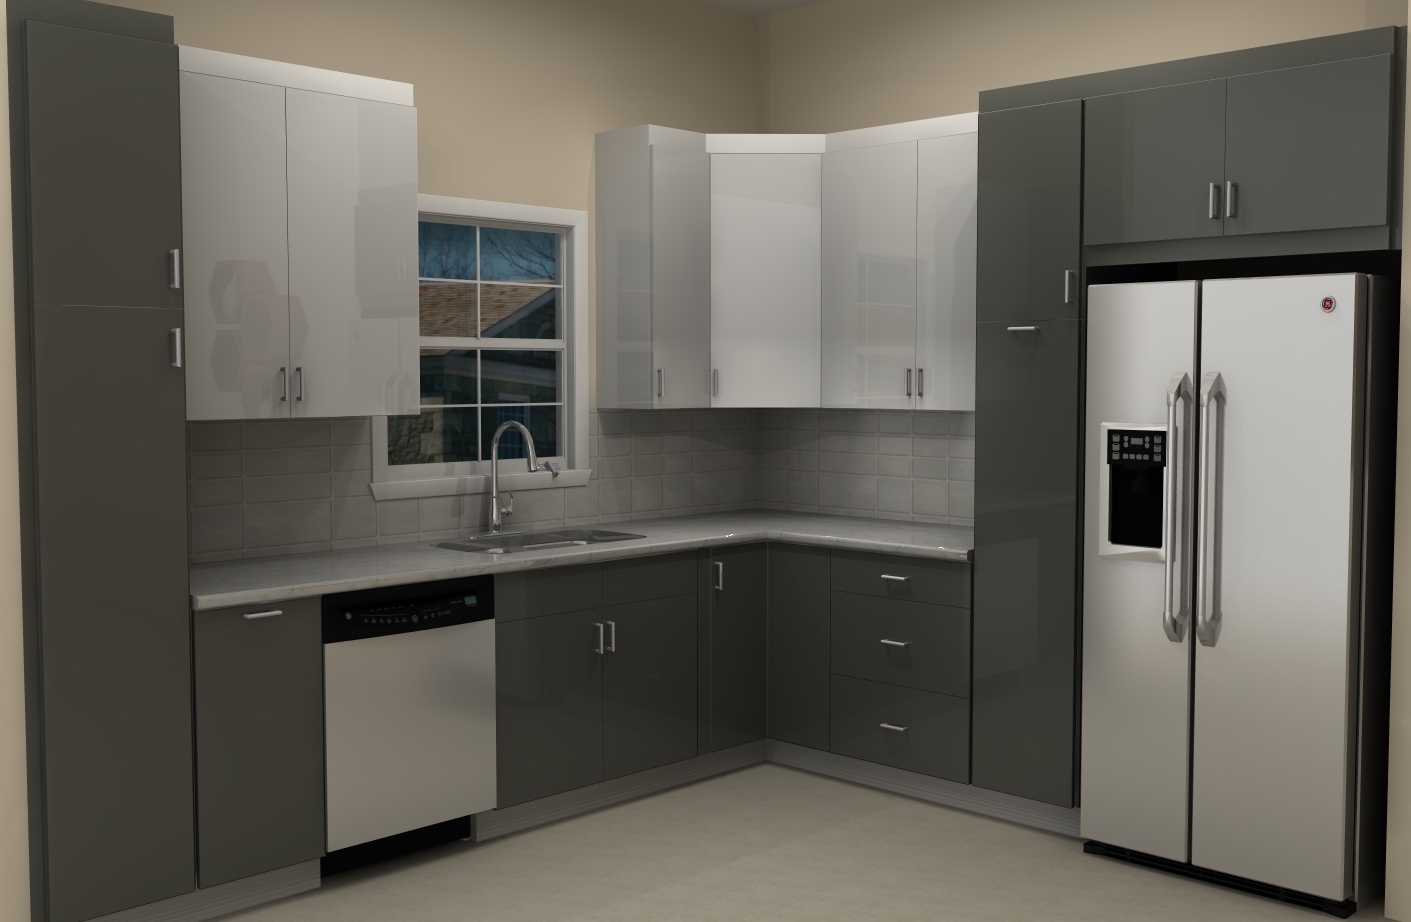 High Gloss Abstrakt Doors Are A Favorite Choice For Modern White Ikea Kitchens This Do Inexpensive Kitchen Remodel Ikea Kitchen Remodel Simple Kitchen Remodel